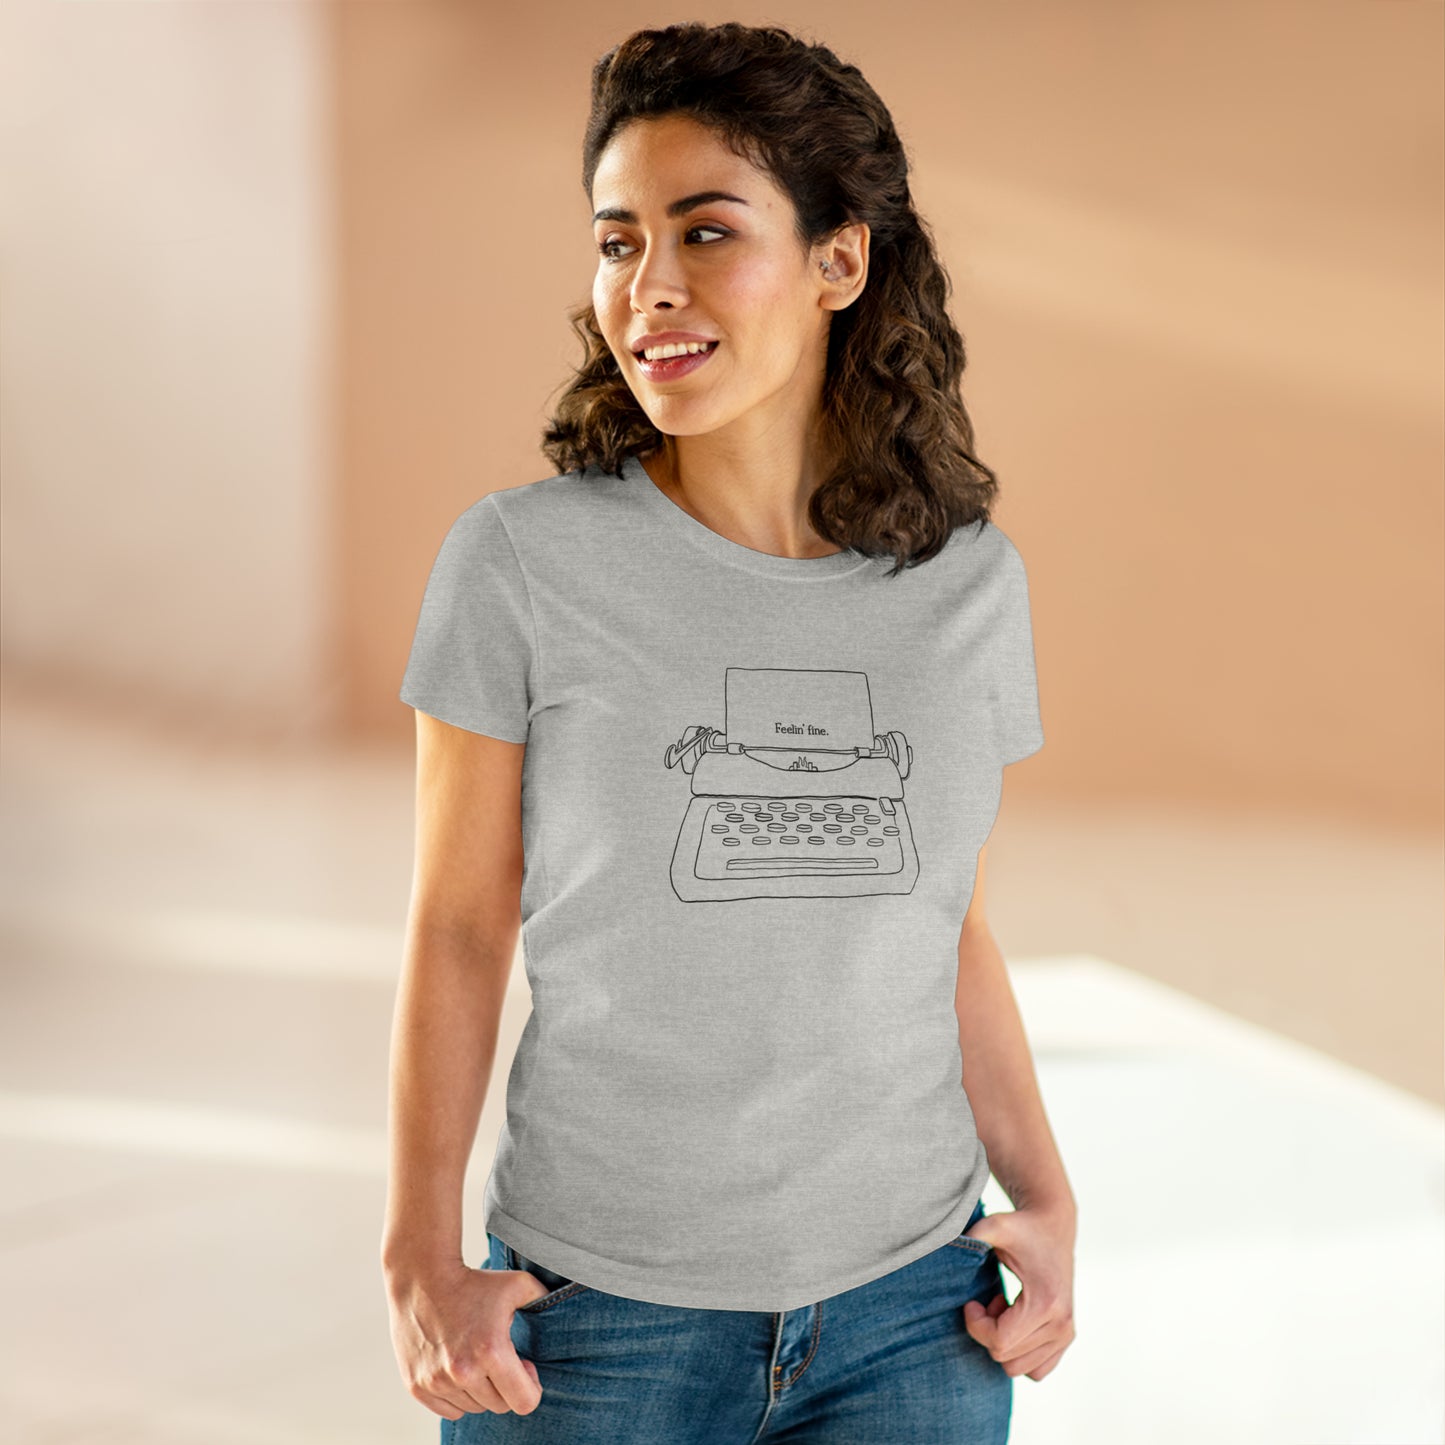 Window To His Madness Women’s Tee